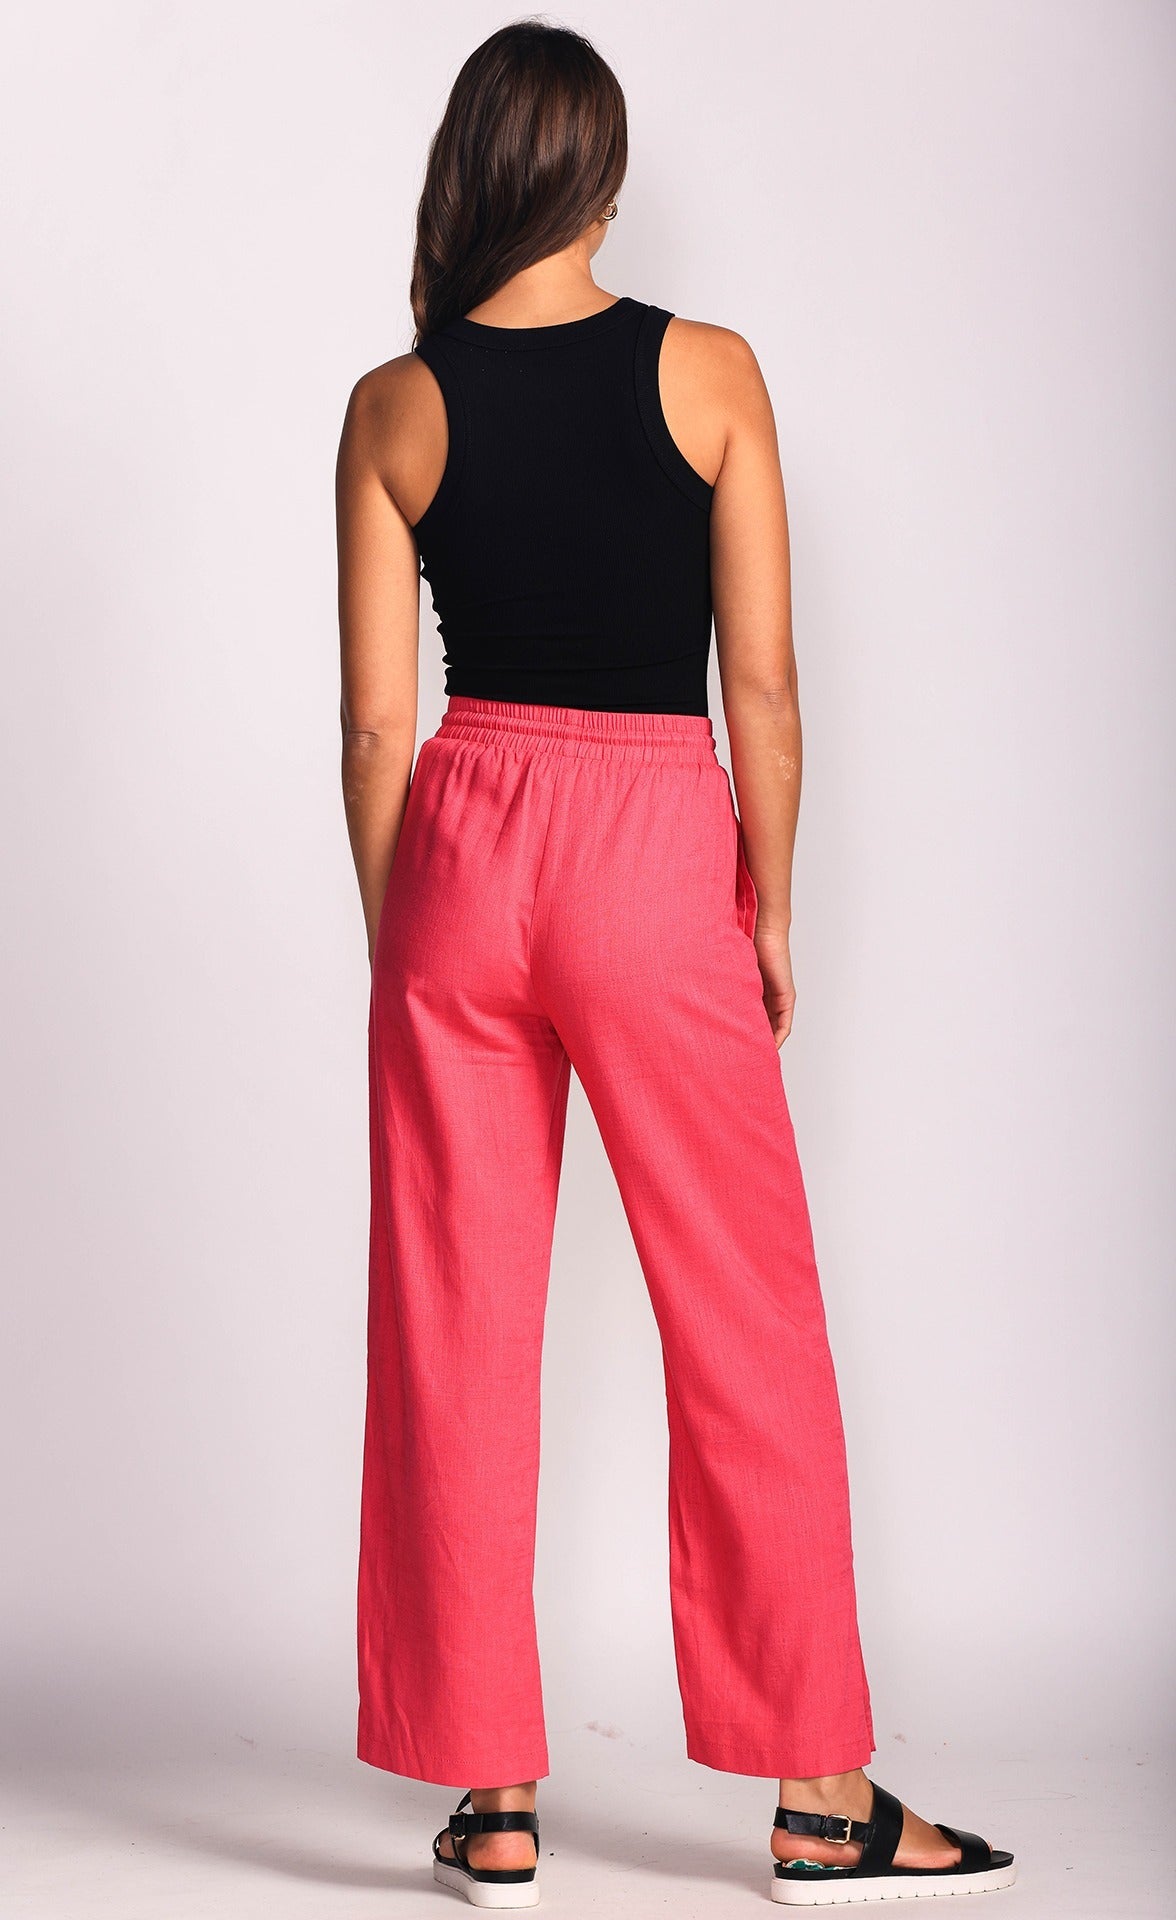 DAISY PANTS - black or pink